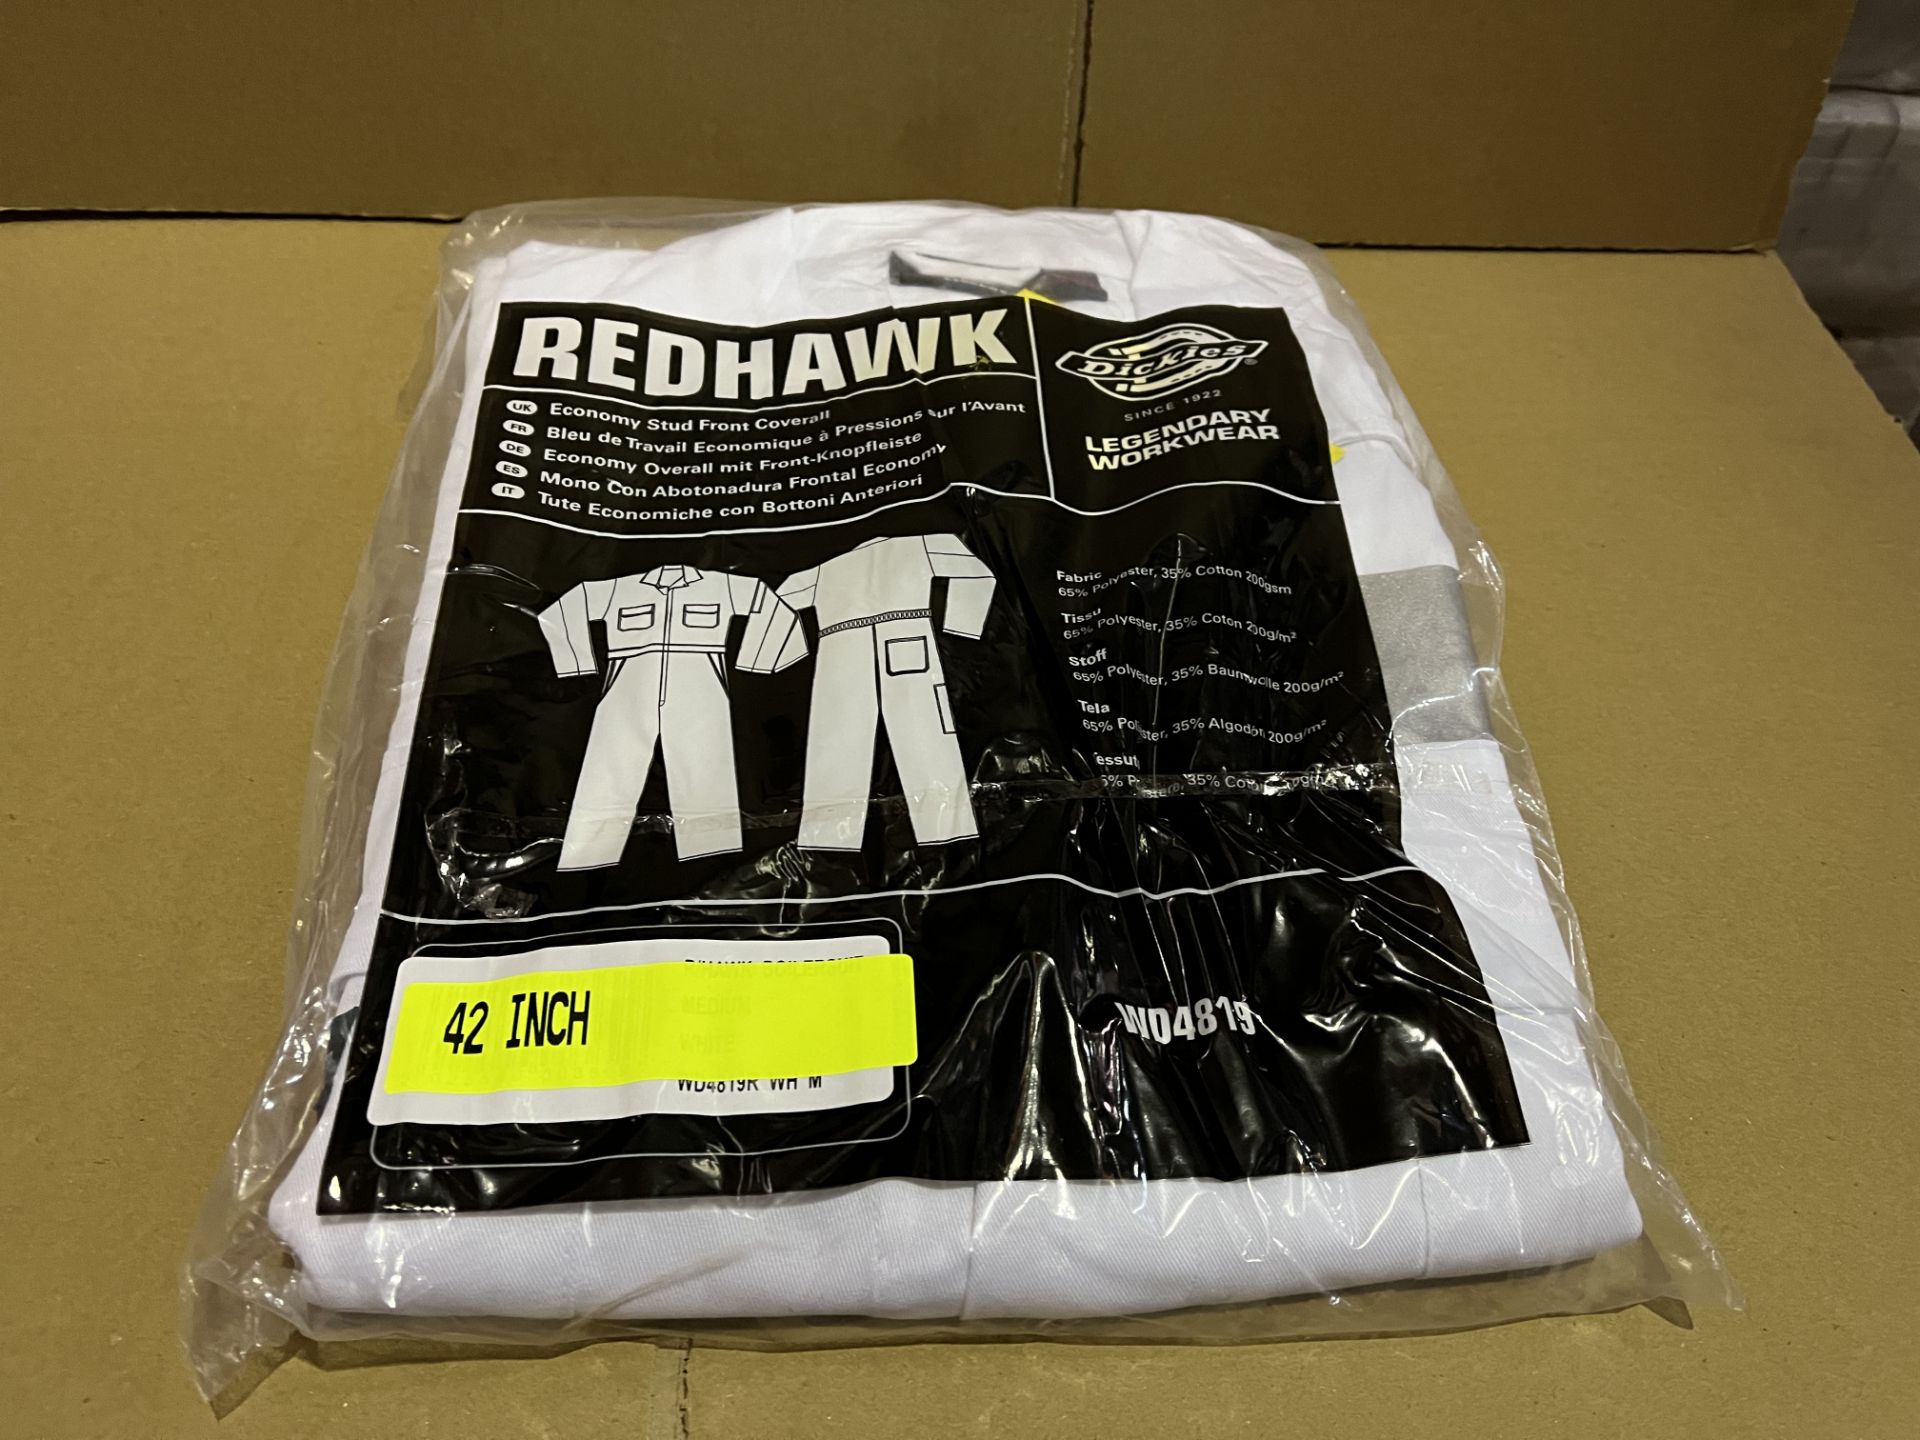 11 X BRAND NEW DICKIES REDHAWK 42 INCH STUD FRONT COVERALLS R10